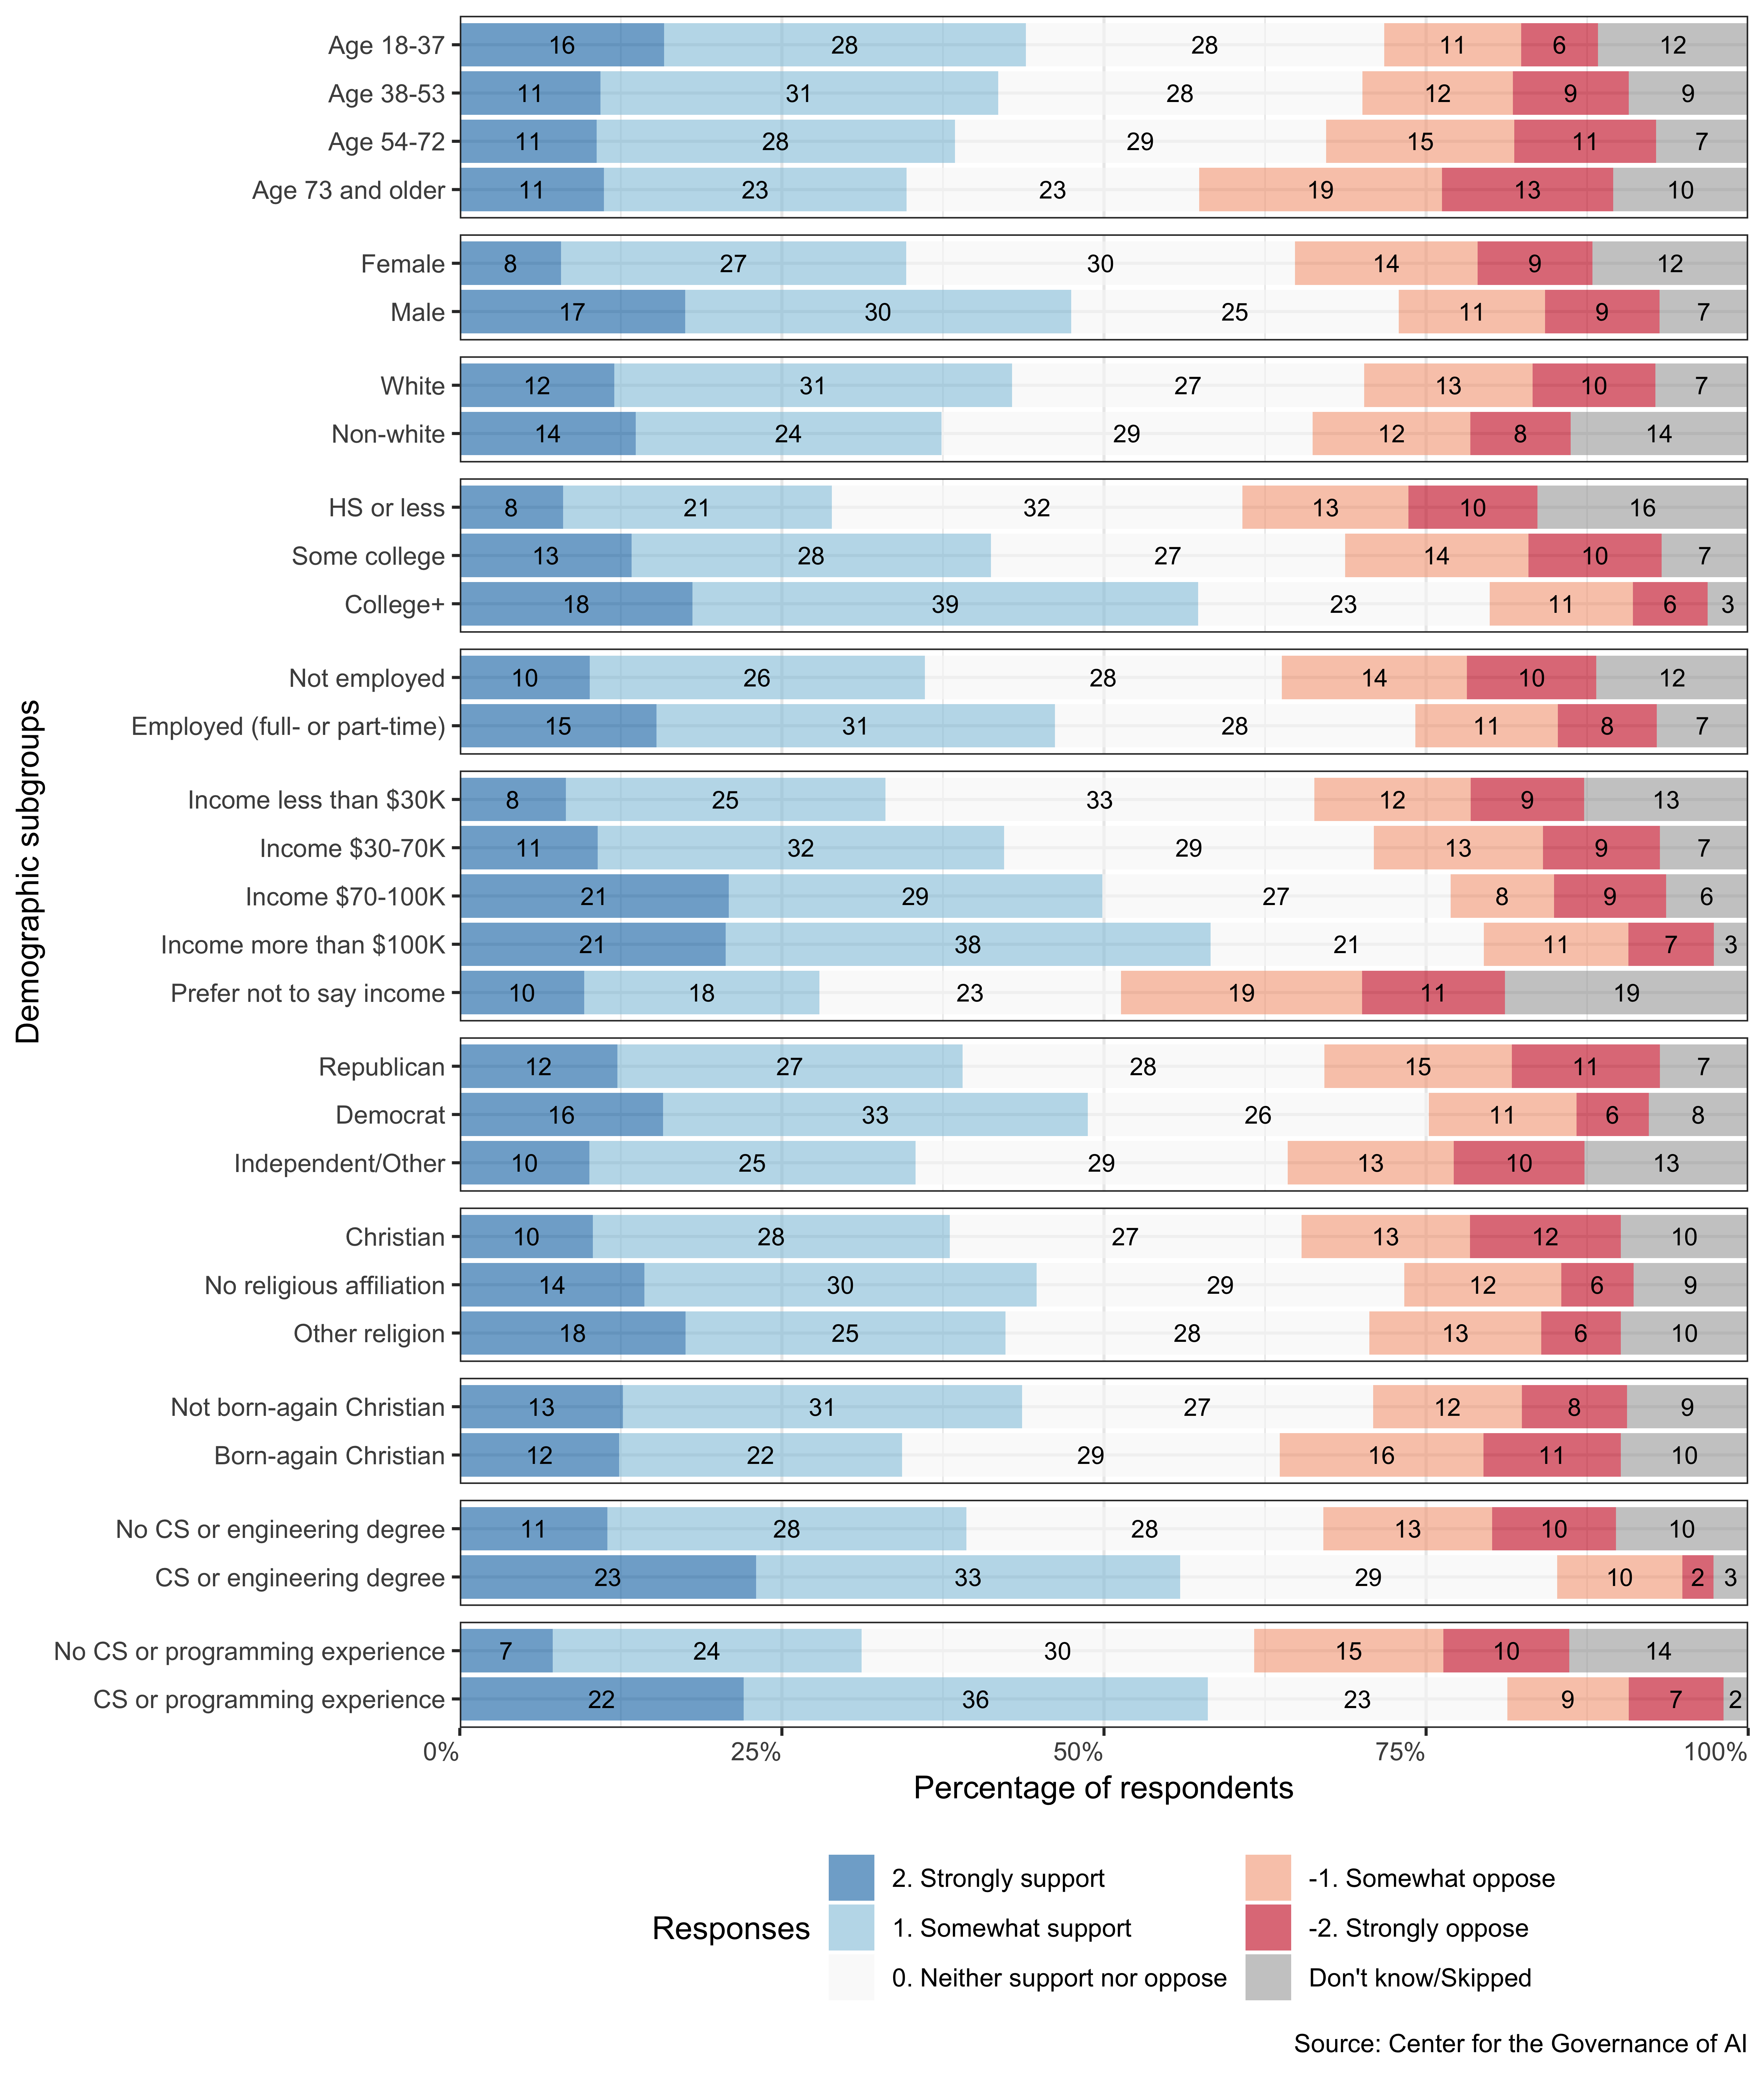 Support for developing AI across demographic characteristics: distribution of responses